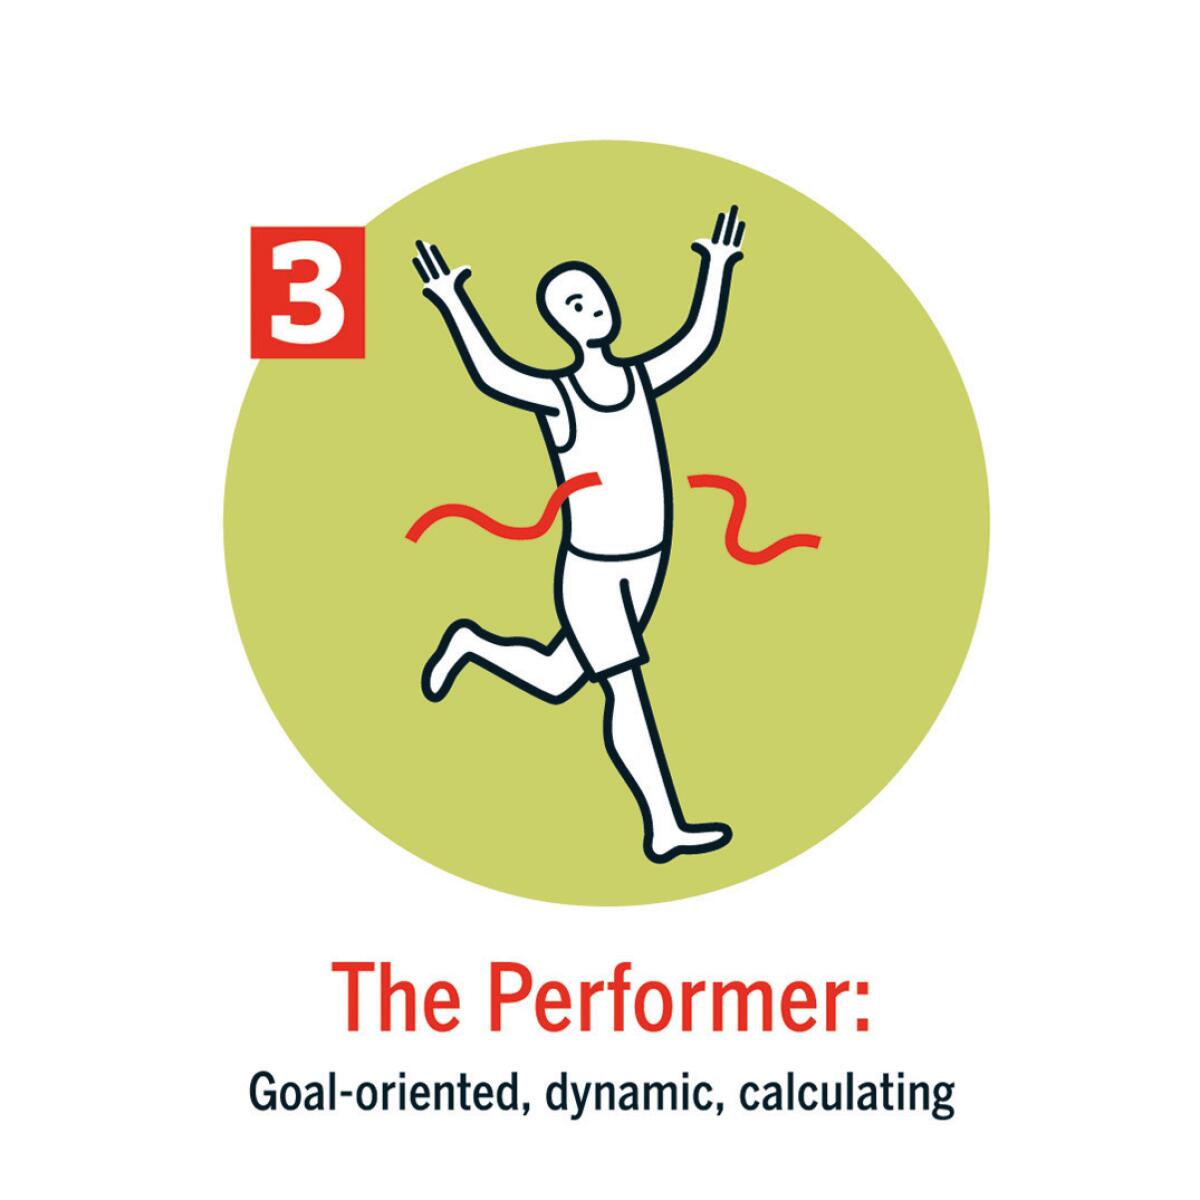 "The Performer" is goal-oriented, calculating.